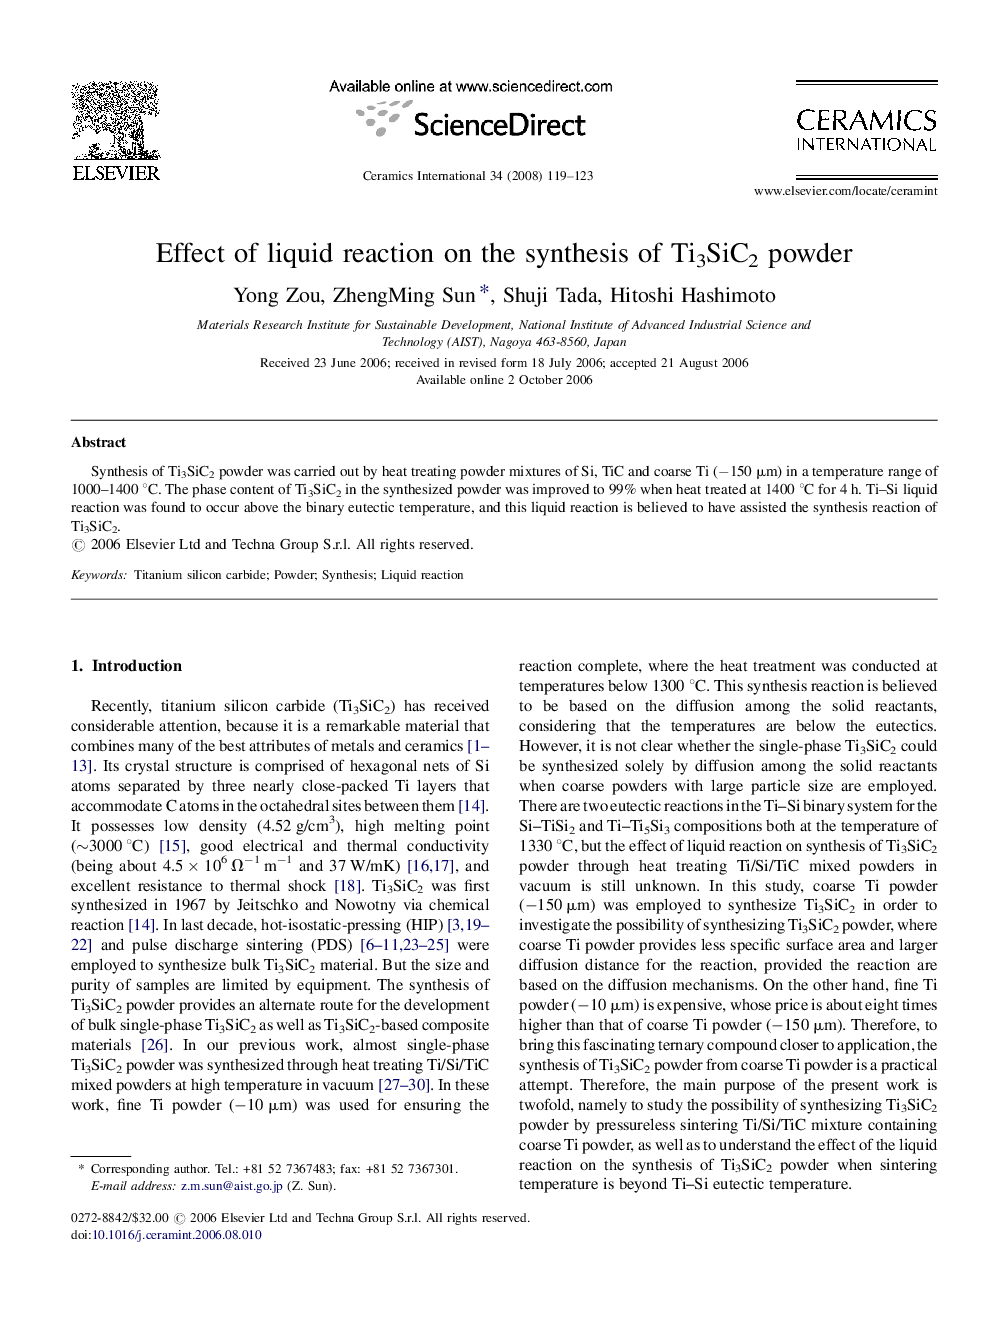 Effect of liquid reaction on the synthesis of Ti3SiC2 powder